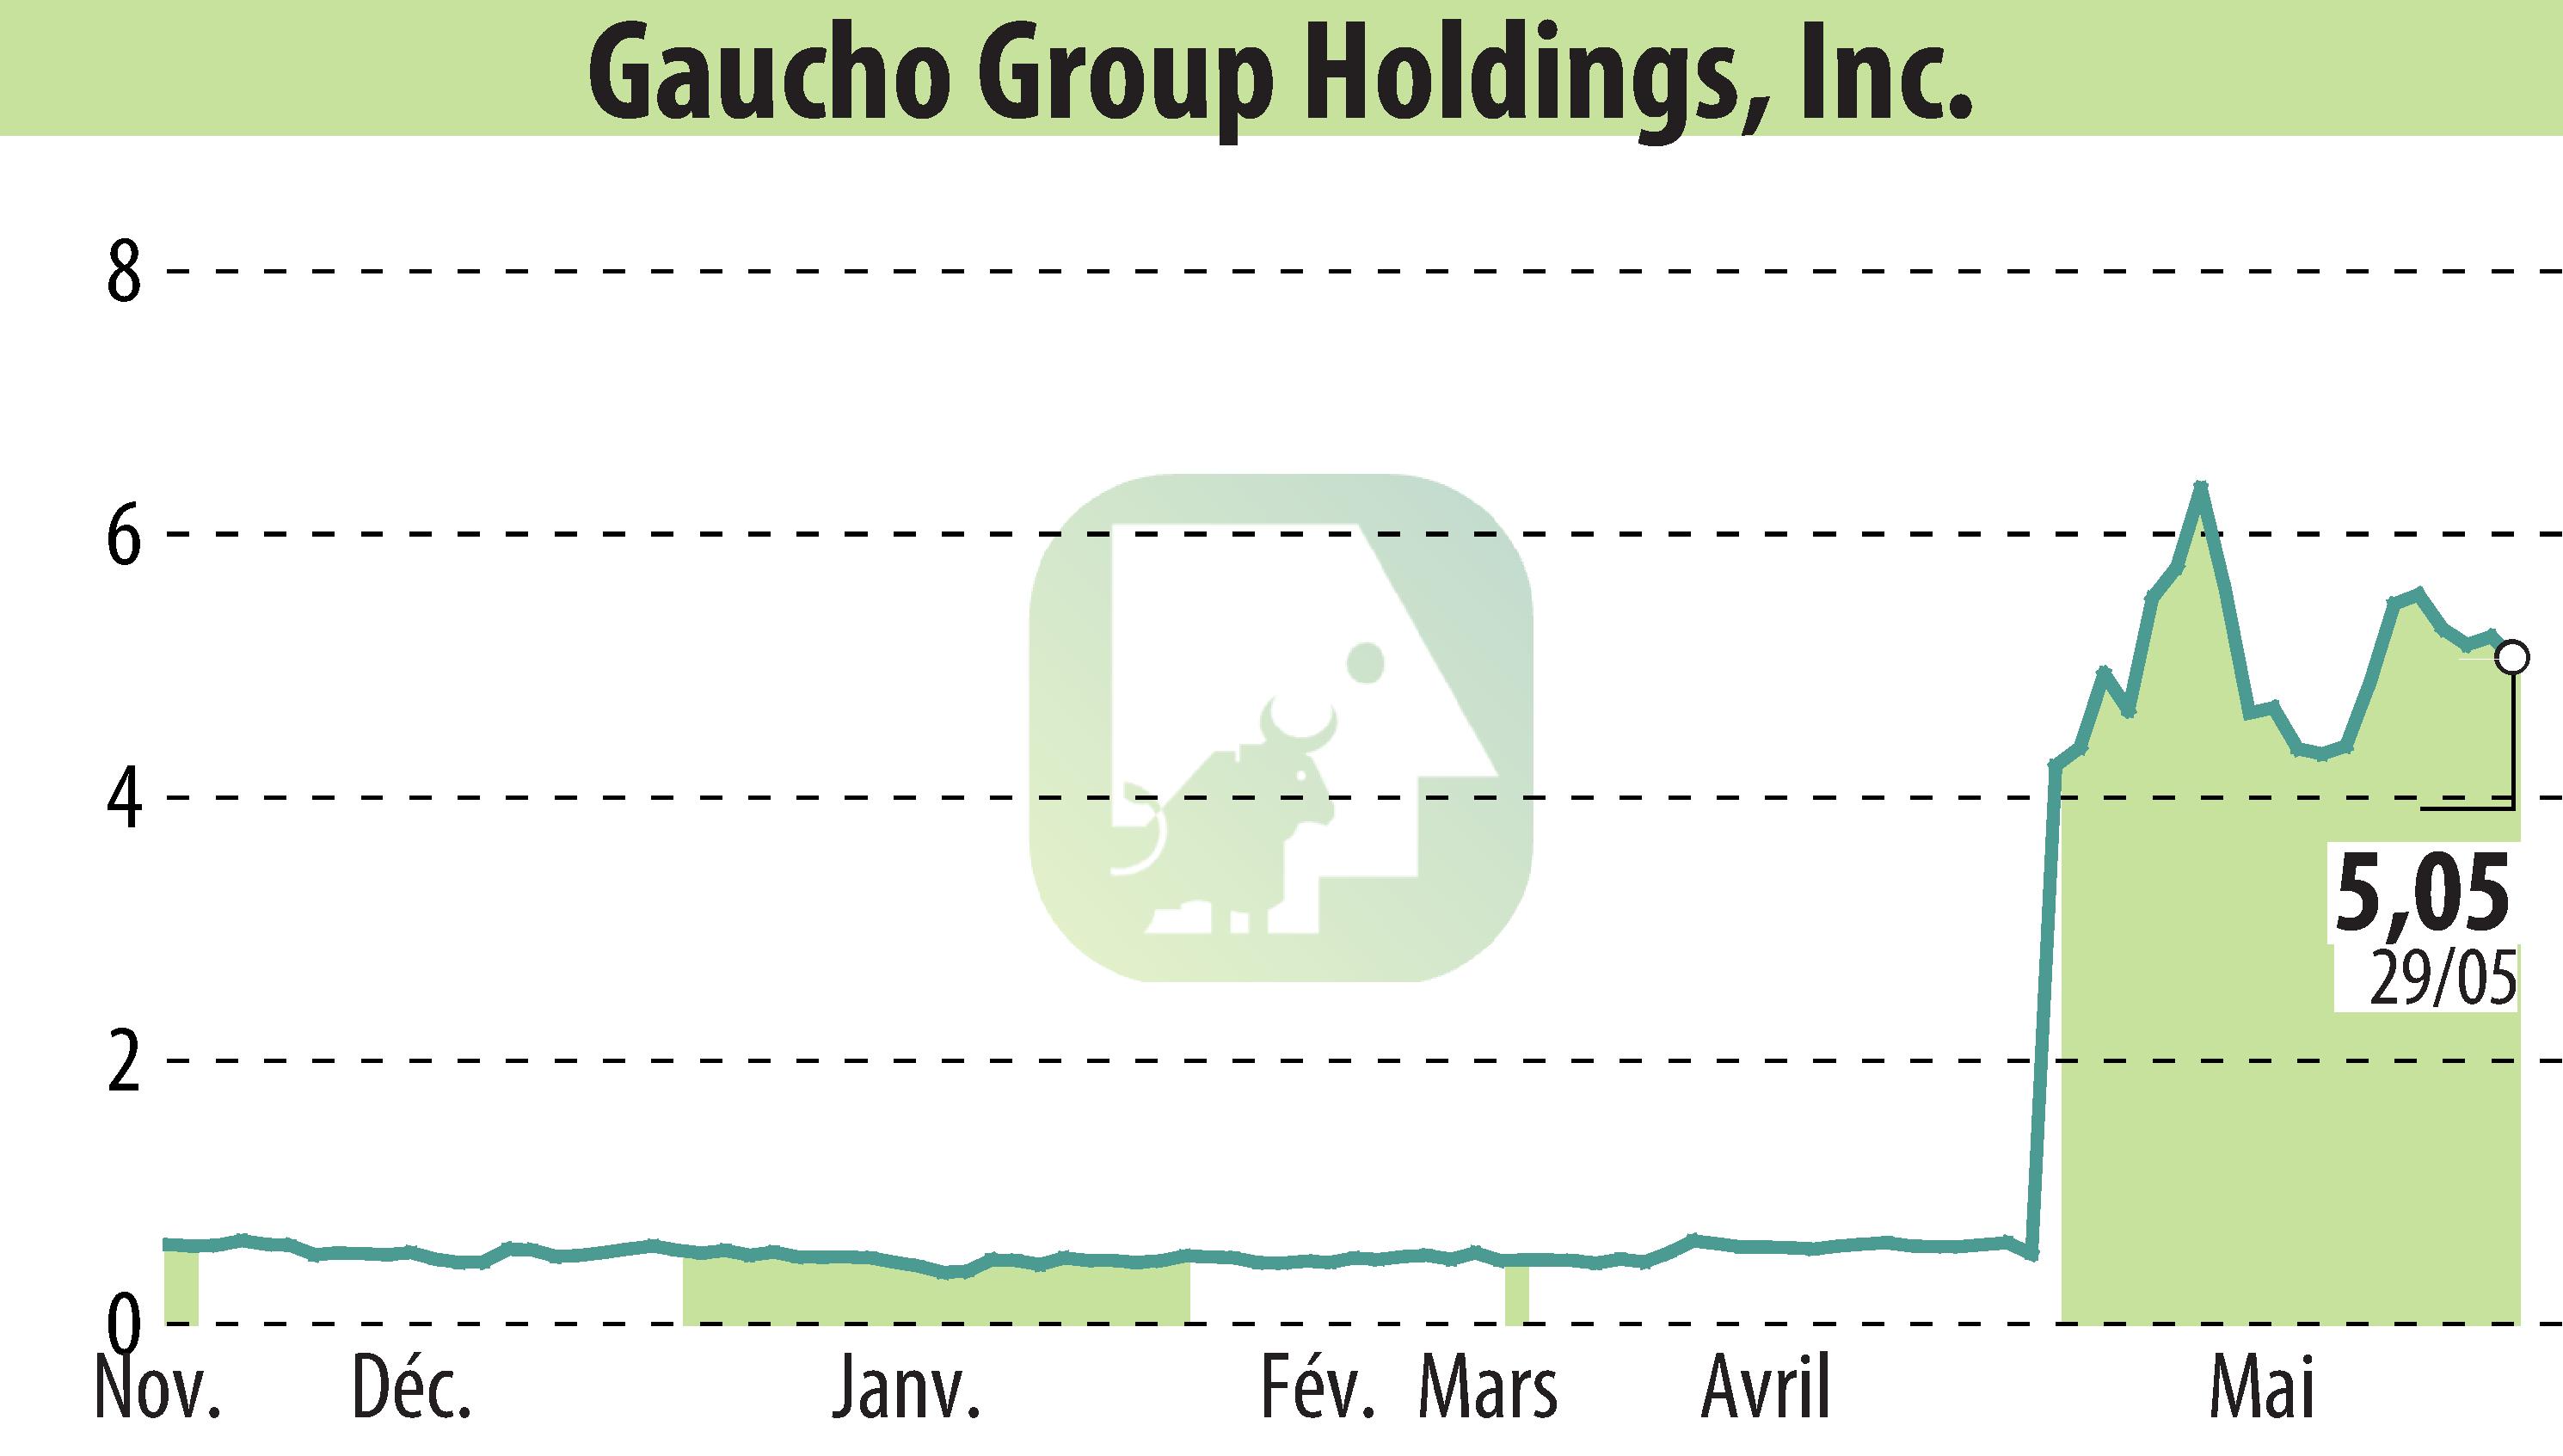 Stock price chart of Gaucho Group Holdings, Inc. (EBR:VINO) showing fluctuations.